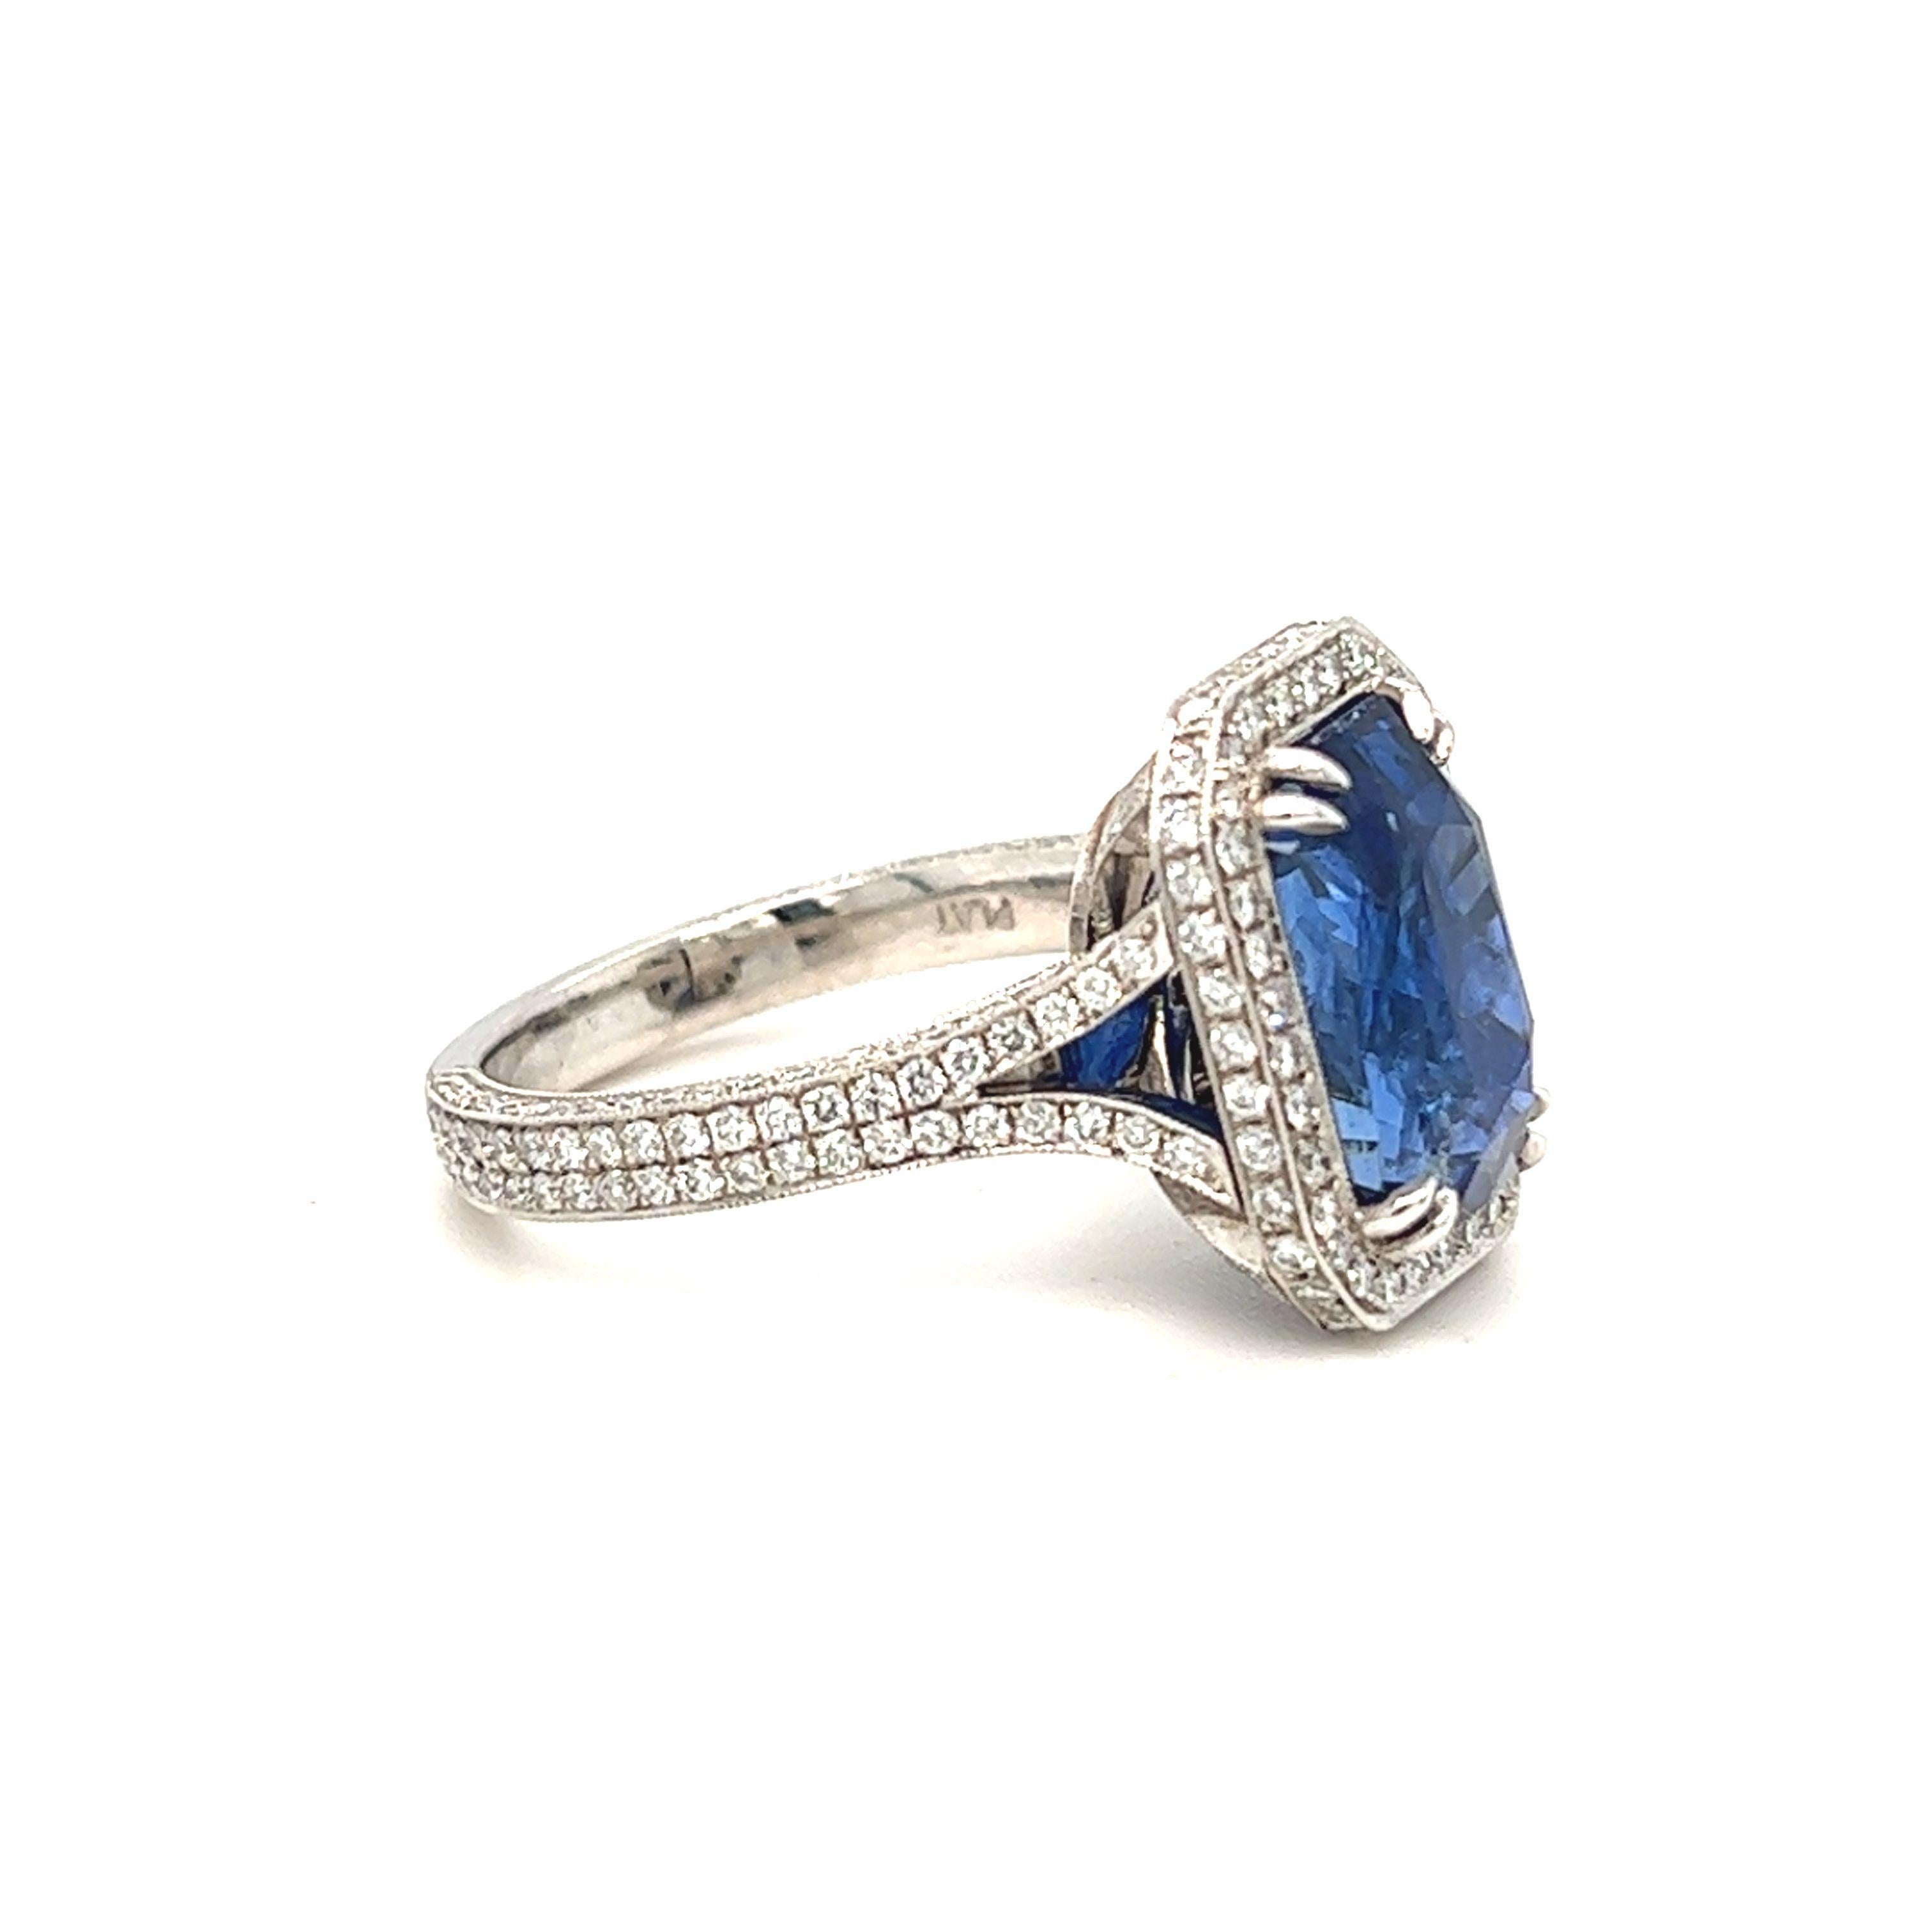 Contemporary Gems Are Forever GIA Certified 8.14 Carat Sapphire and Diamond Convertible Ring For Sale